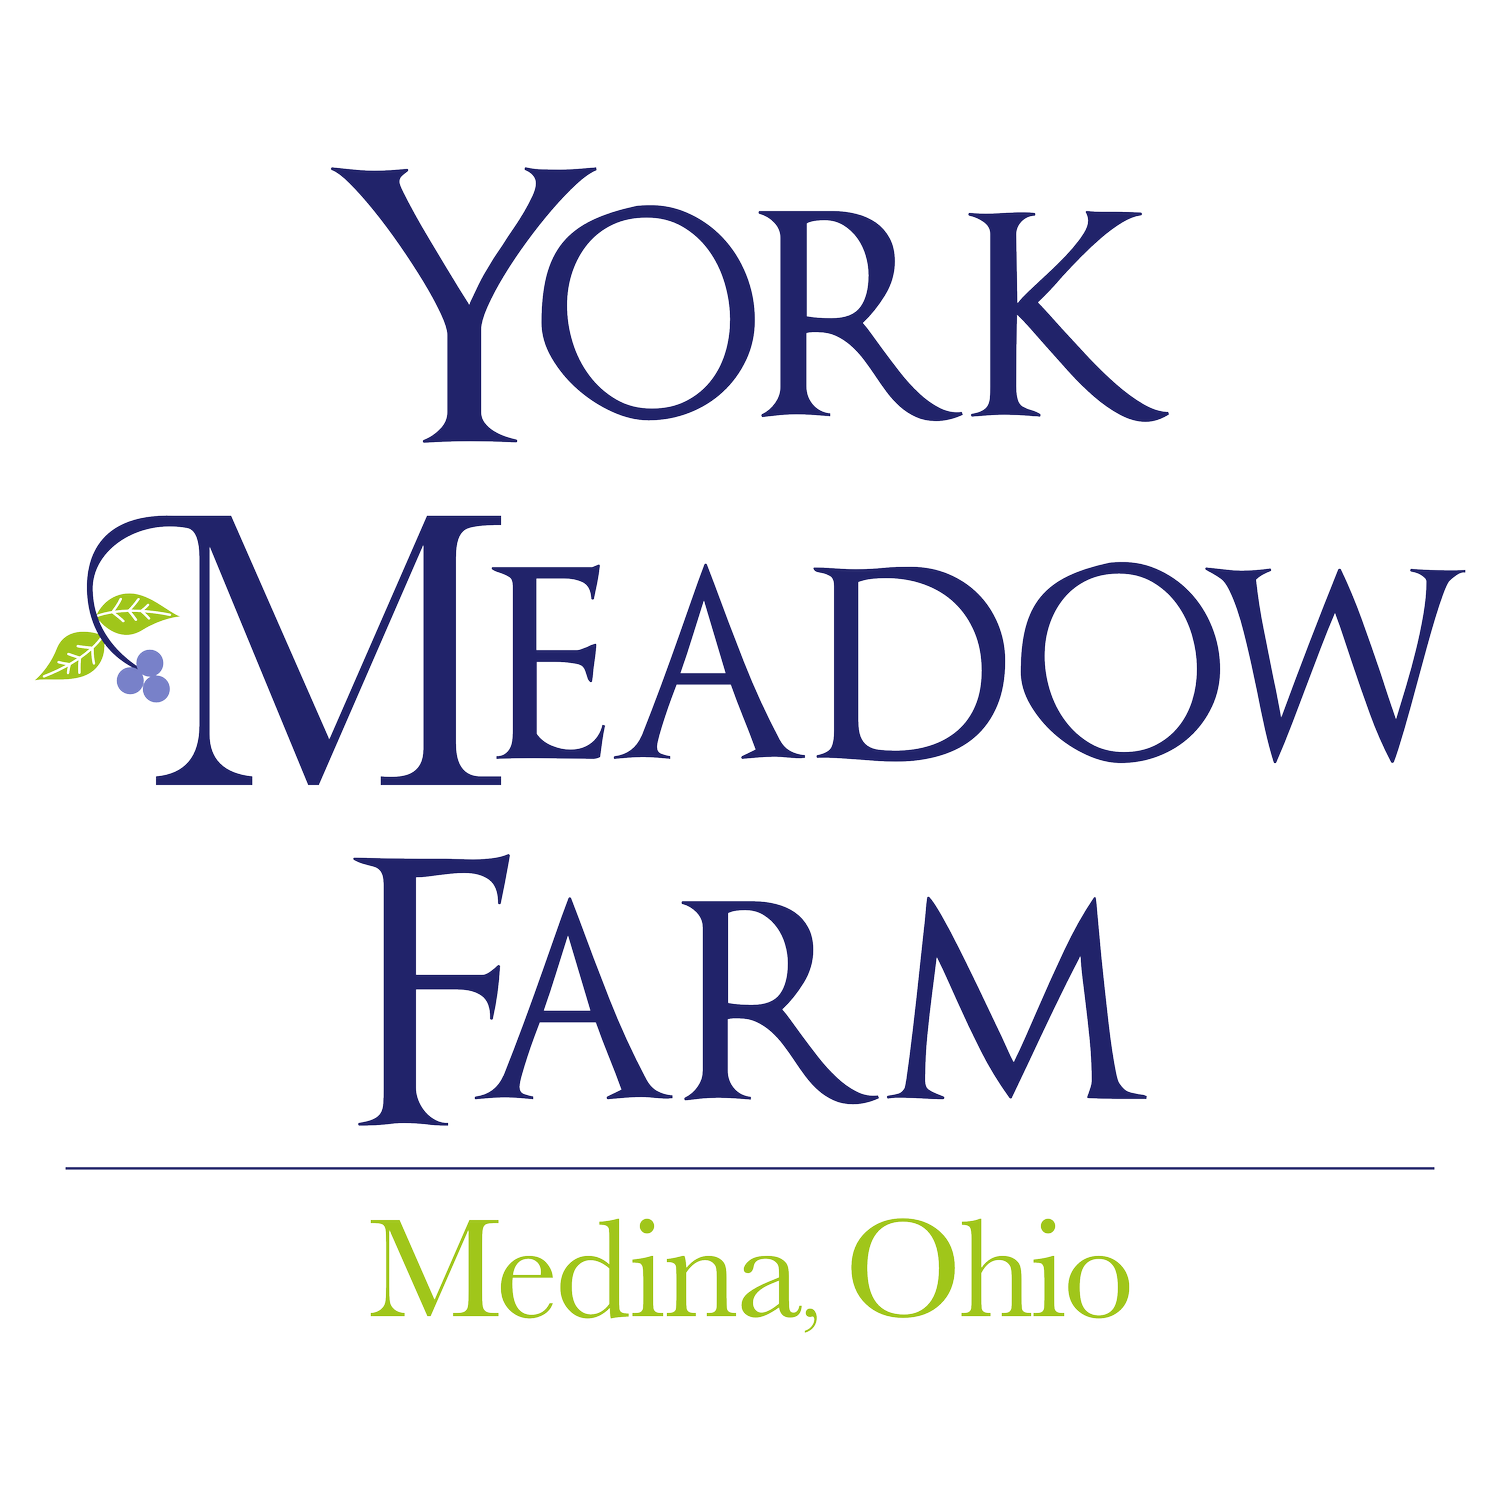 Natural Ferments - A Member of the York Meadow Farm Co-Op